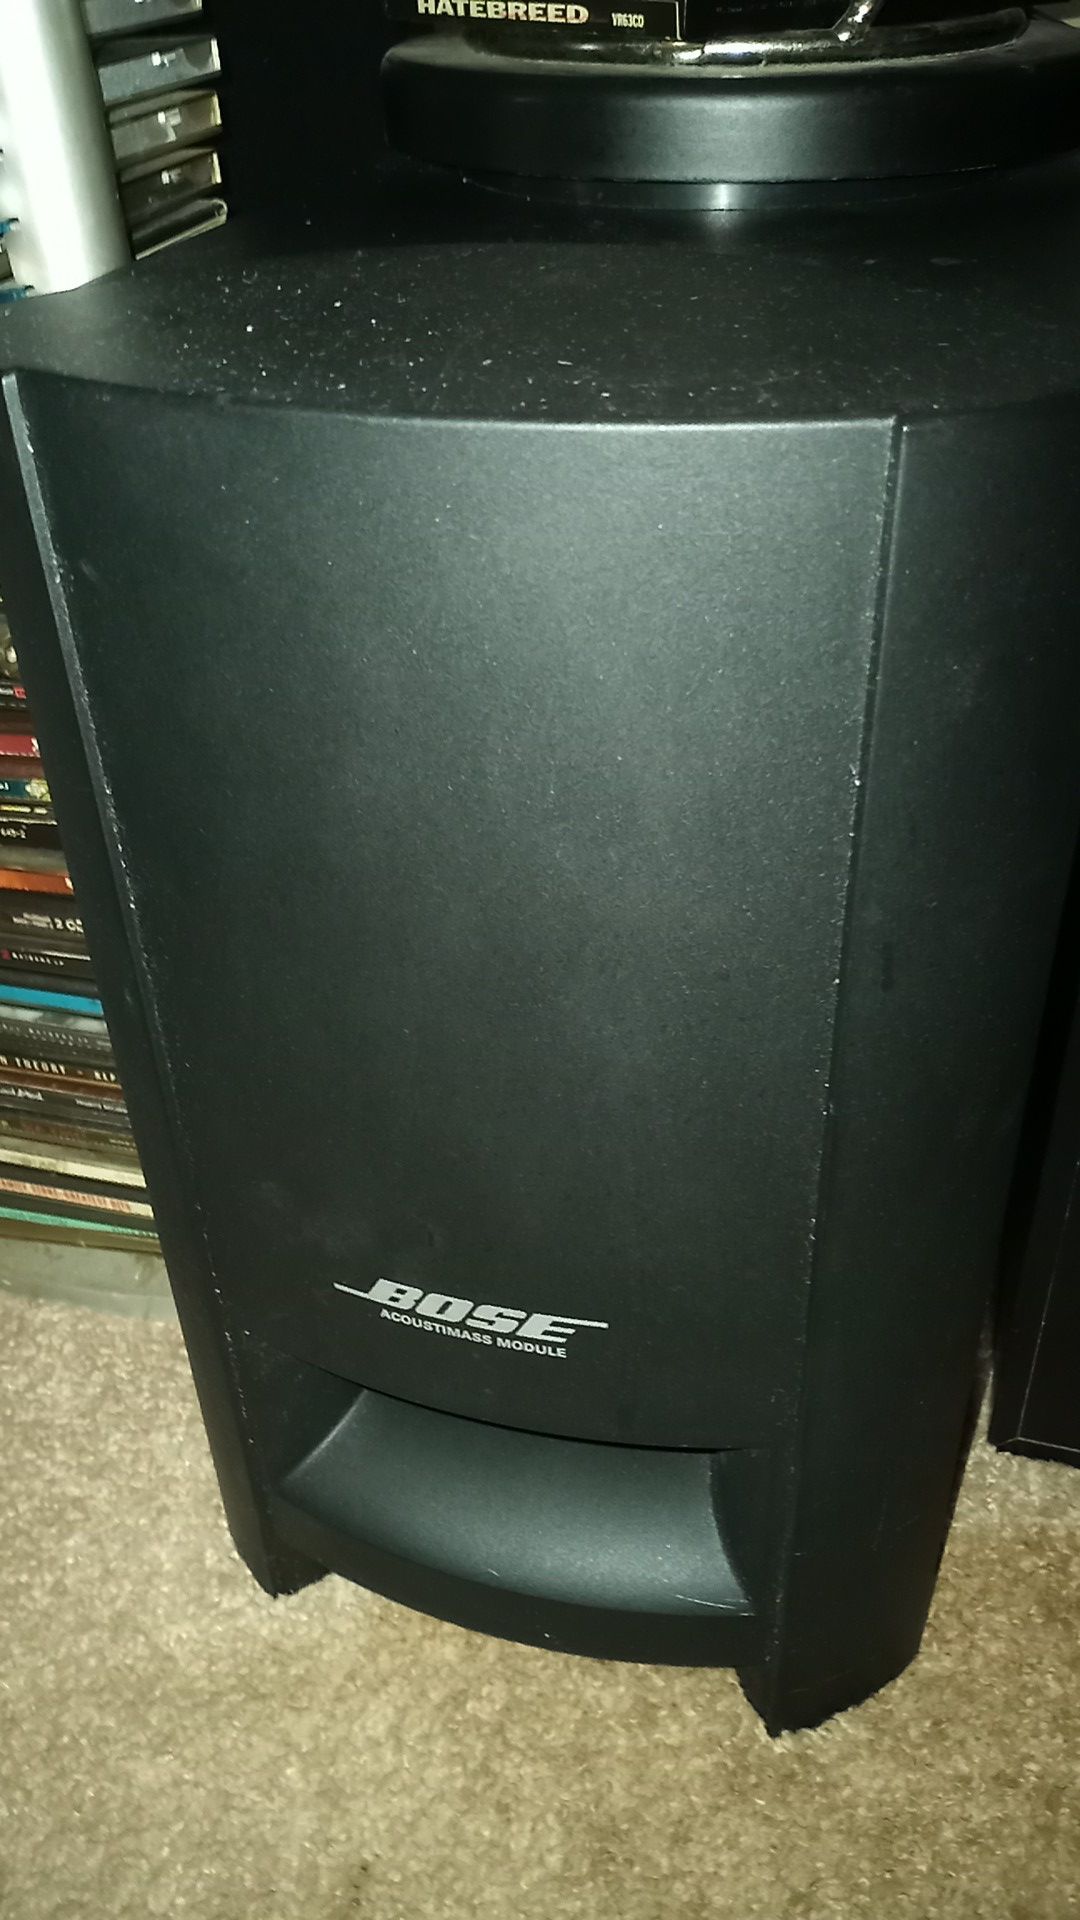 Bose surround sound speakers with sub woofer. $200 obo